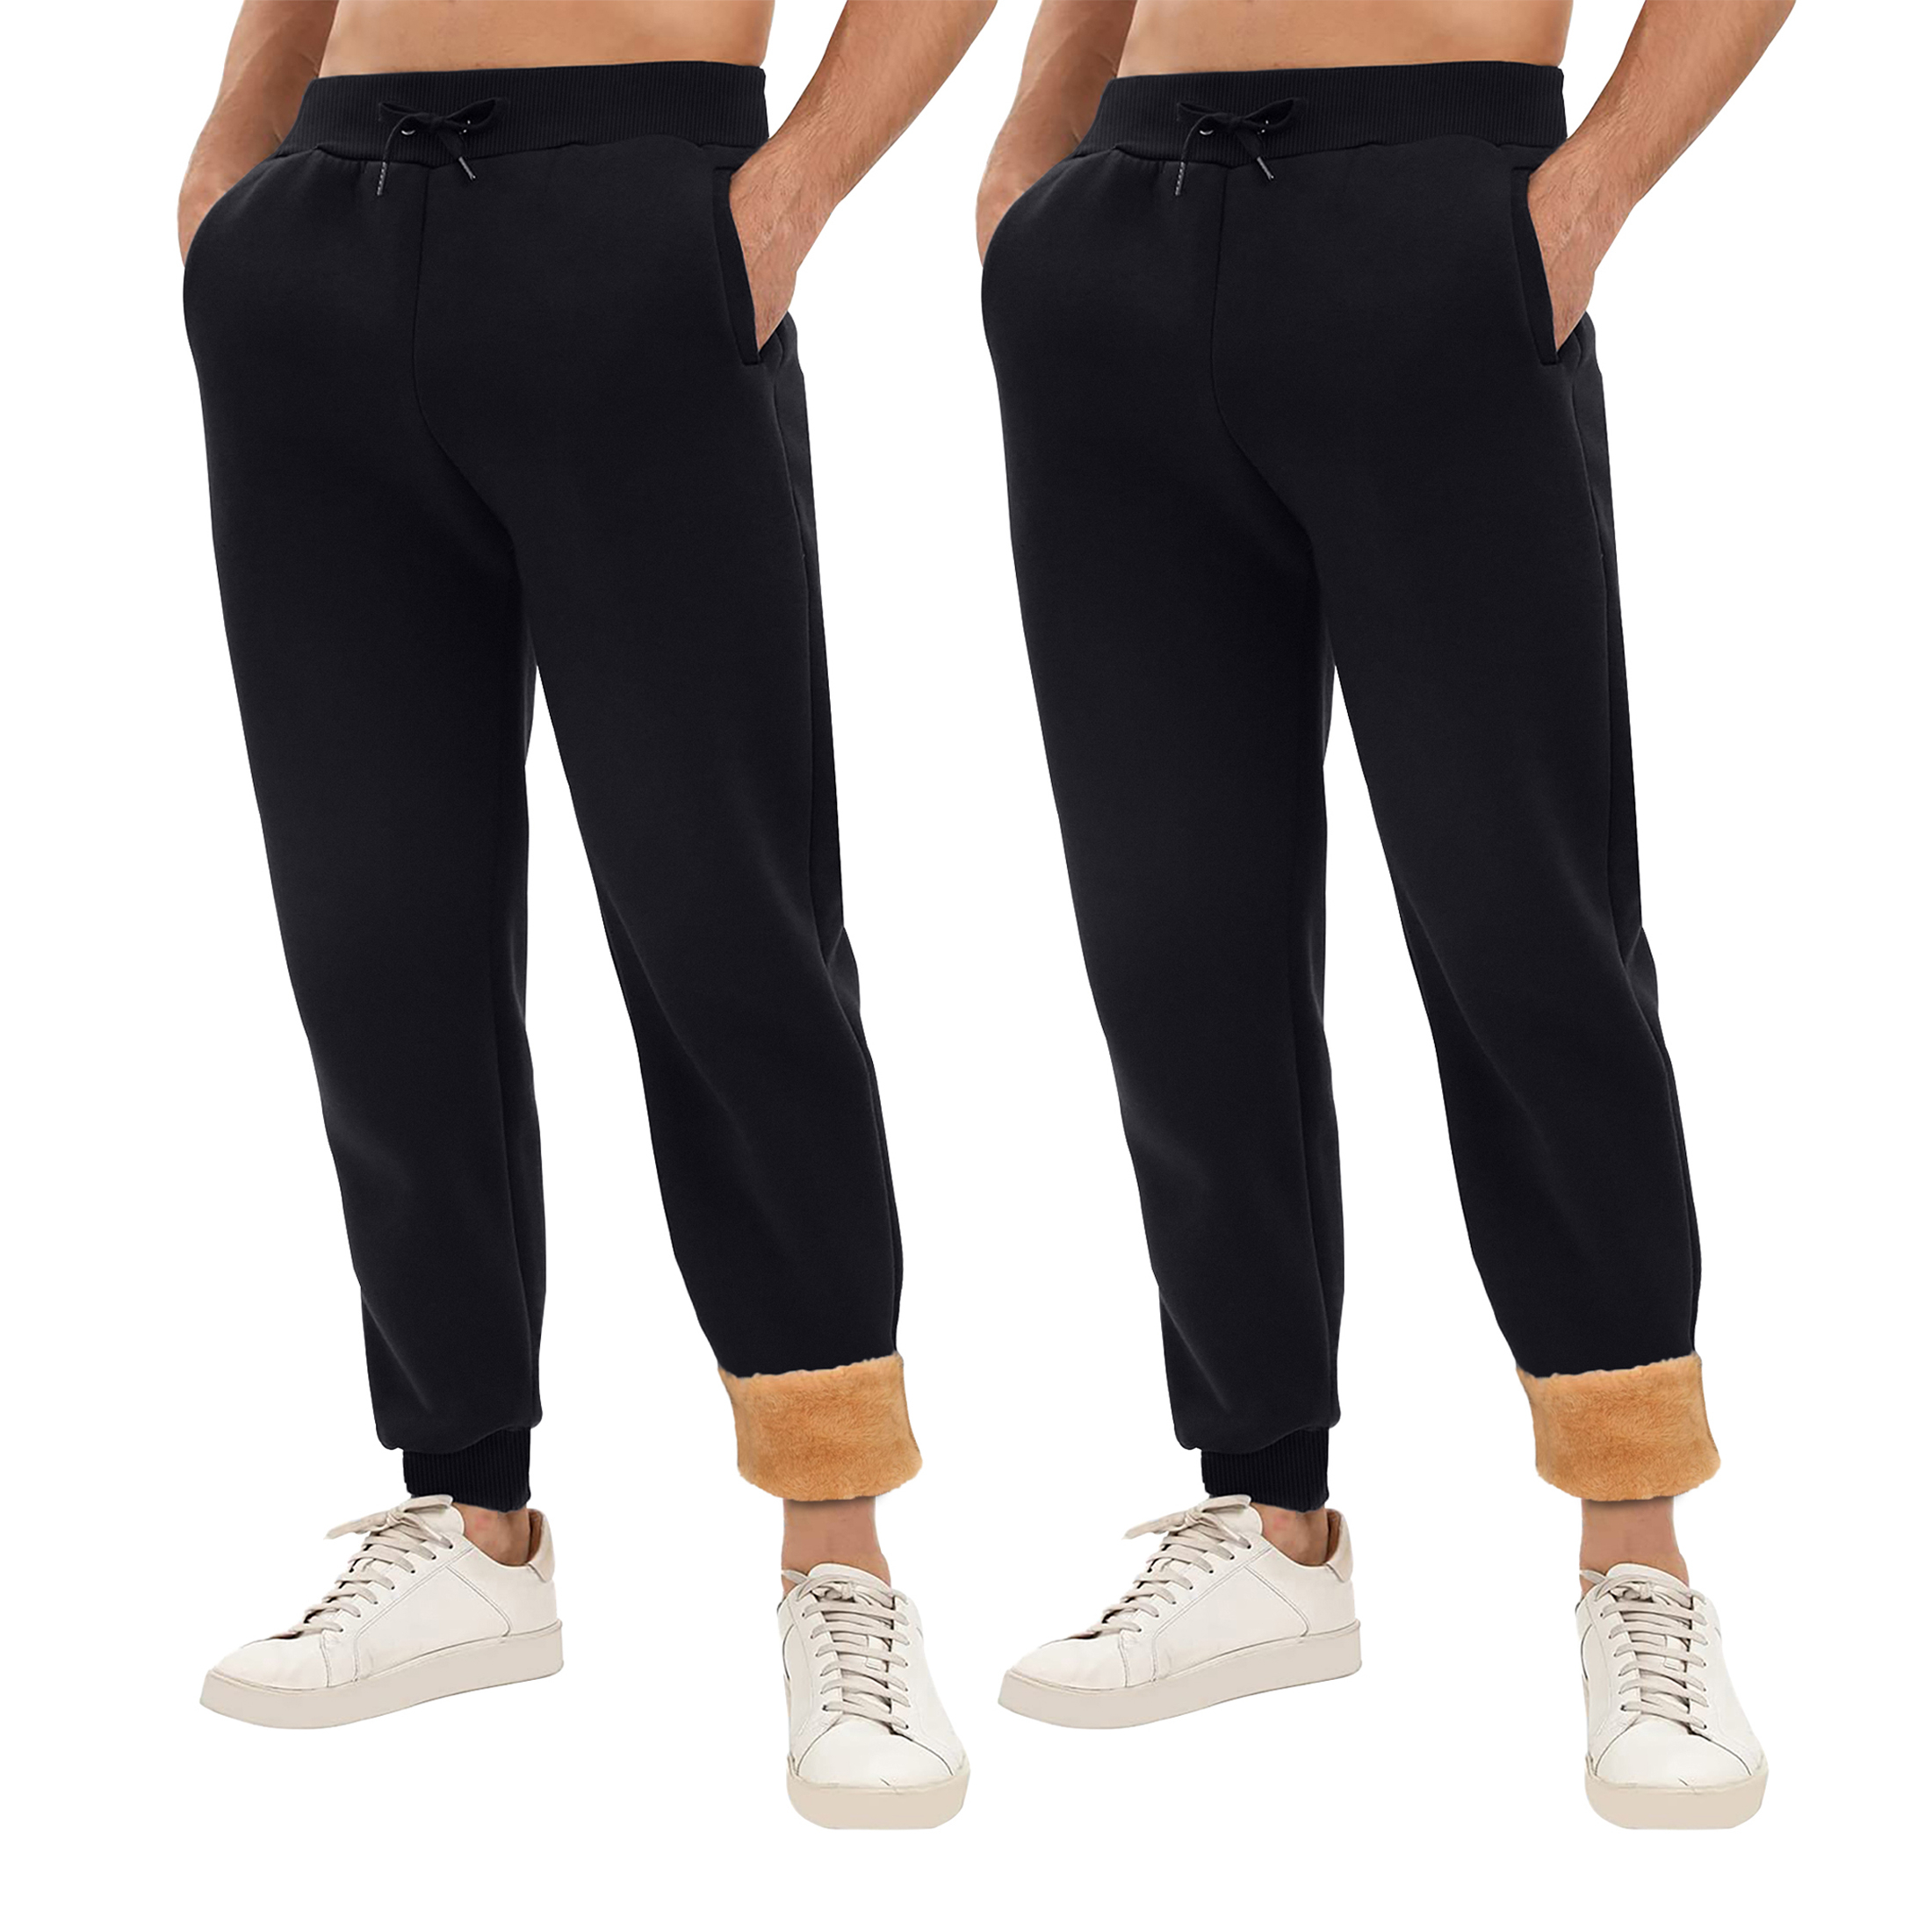 2-Pack: Men's Winter Warm Thick Sherpa Lined Jogger Track Pants With Pockets - Black, X-Large